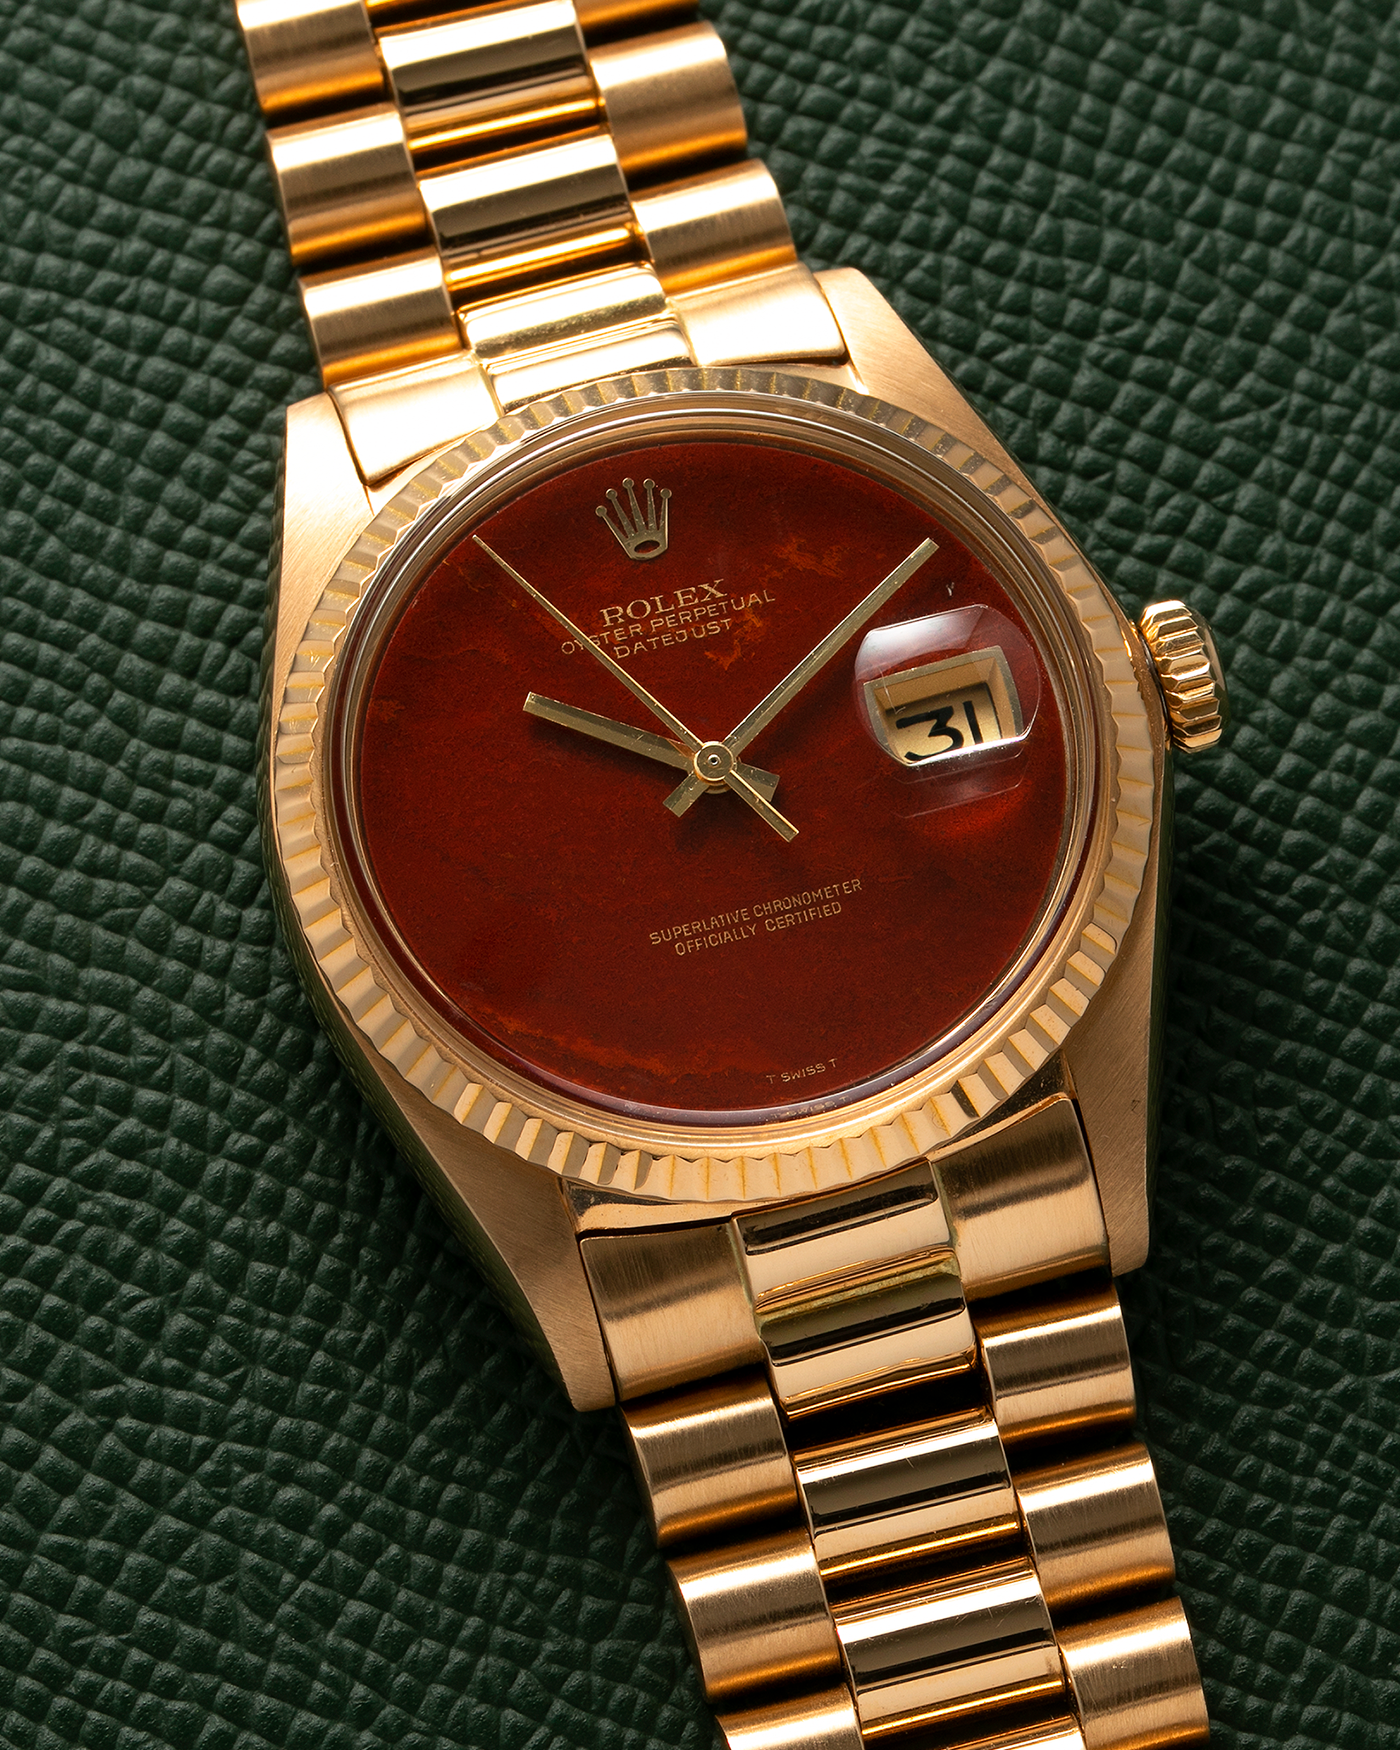 Brand: Rolex Year: 1975 Model: Datejust Reference Number: 1601/8 Serial Number: 392XXXX Material: 18-carat Yellow Gold, Red Jasper Stone Dial Movement: Rolex Cal. 1565, Self-Winding Case Diameter: 36mm Lug Width: 20mm Bracelet: Rolex 18-carat Yellow Gold 8385 Presidential Bracelet with 55B Curved End Links